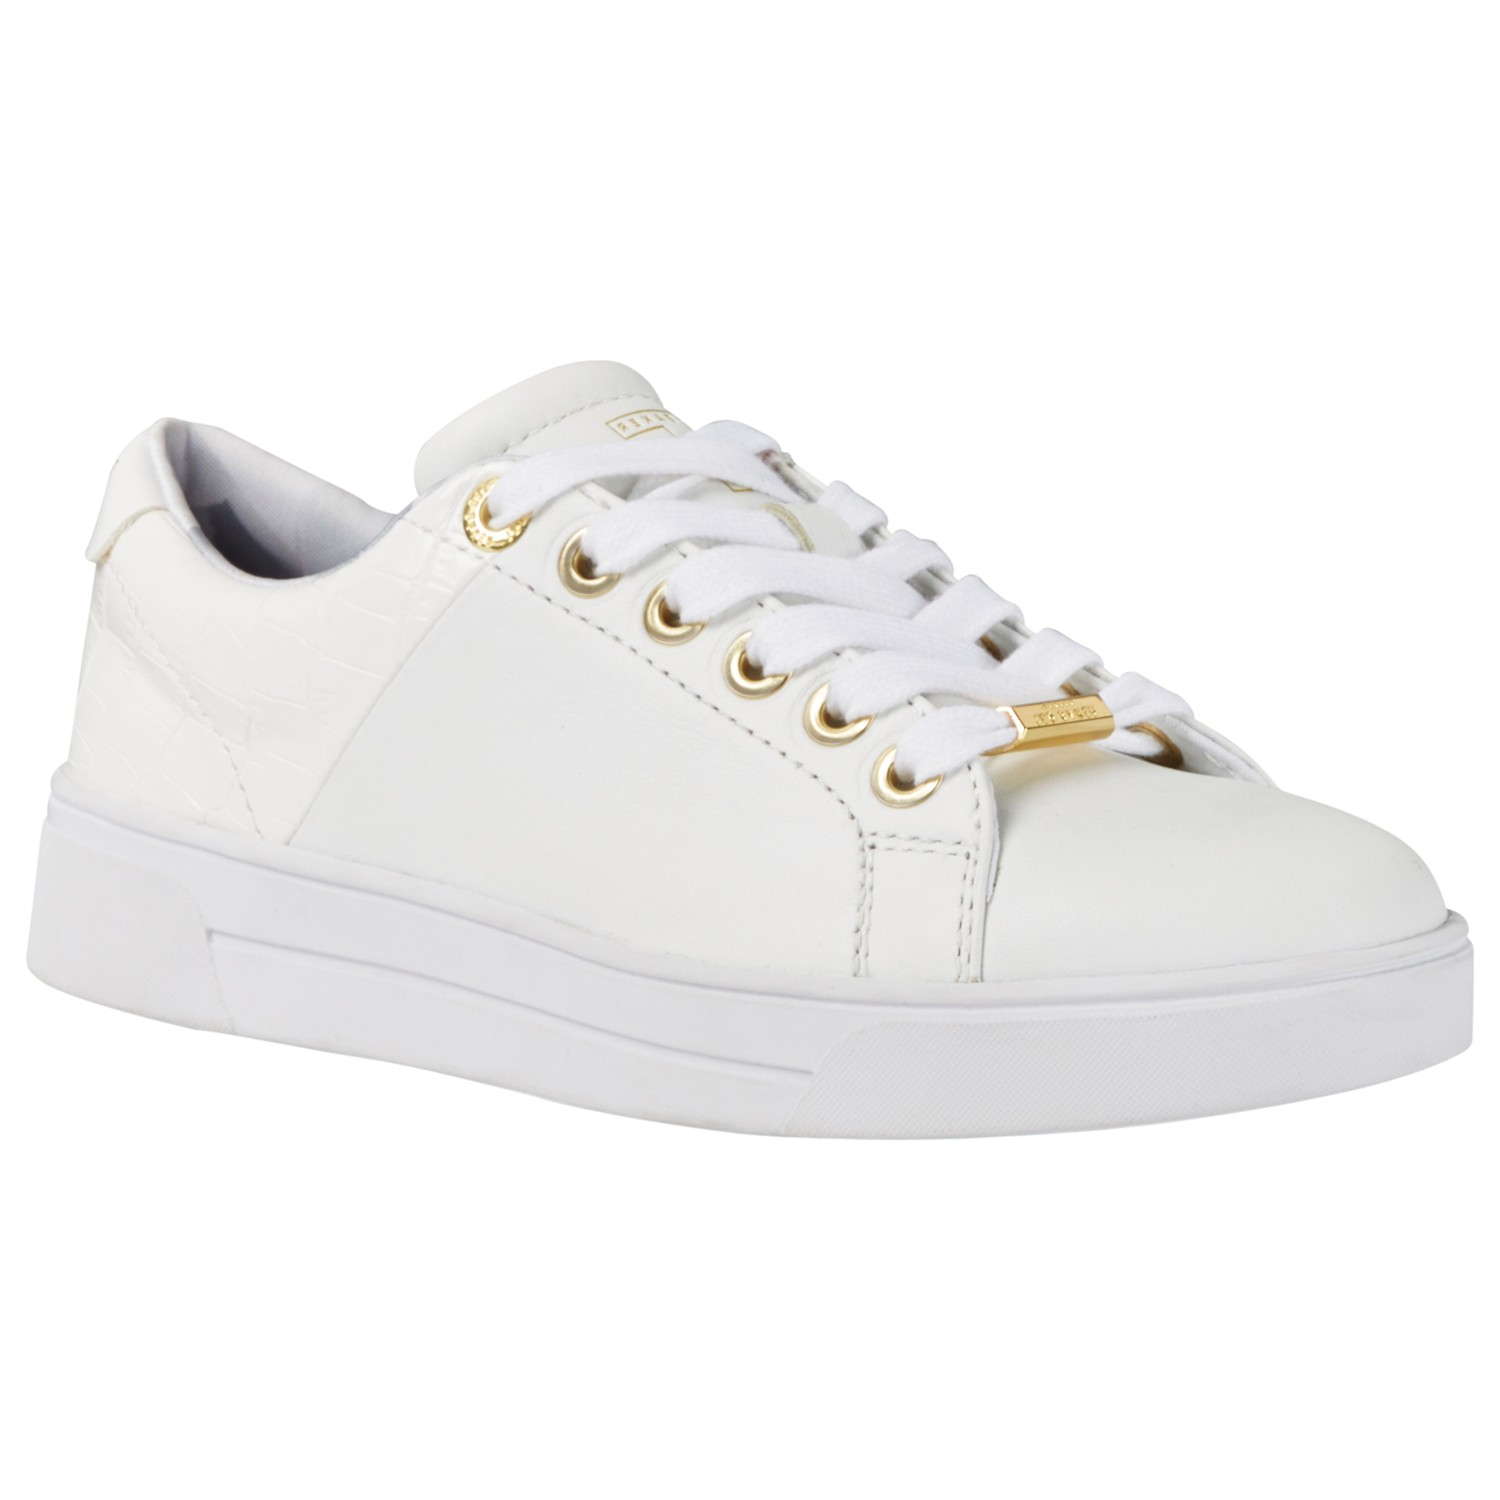 Ted Baker Ophily Trainers in White - Lyst